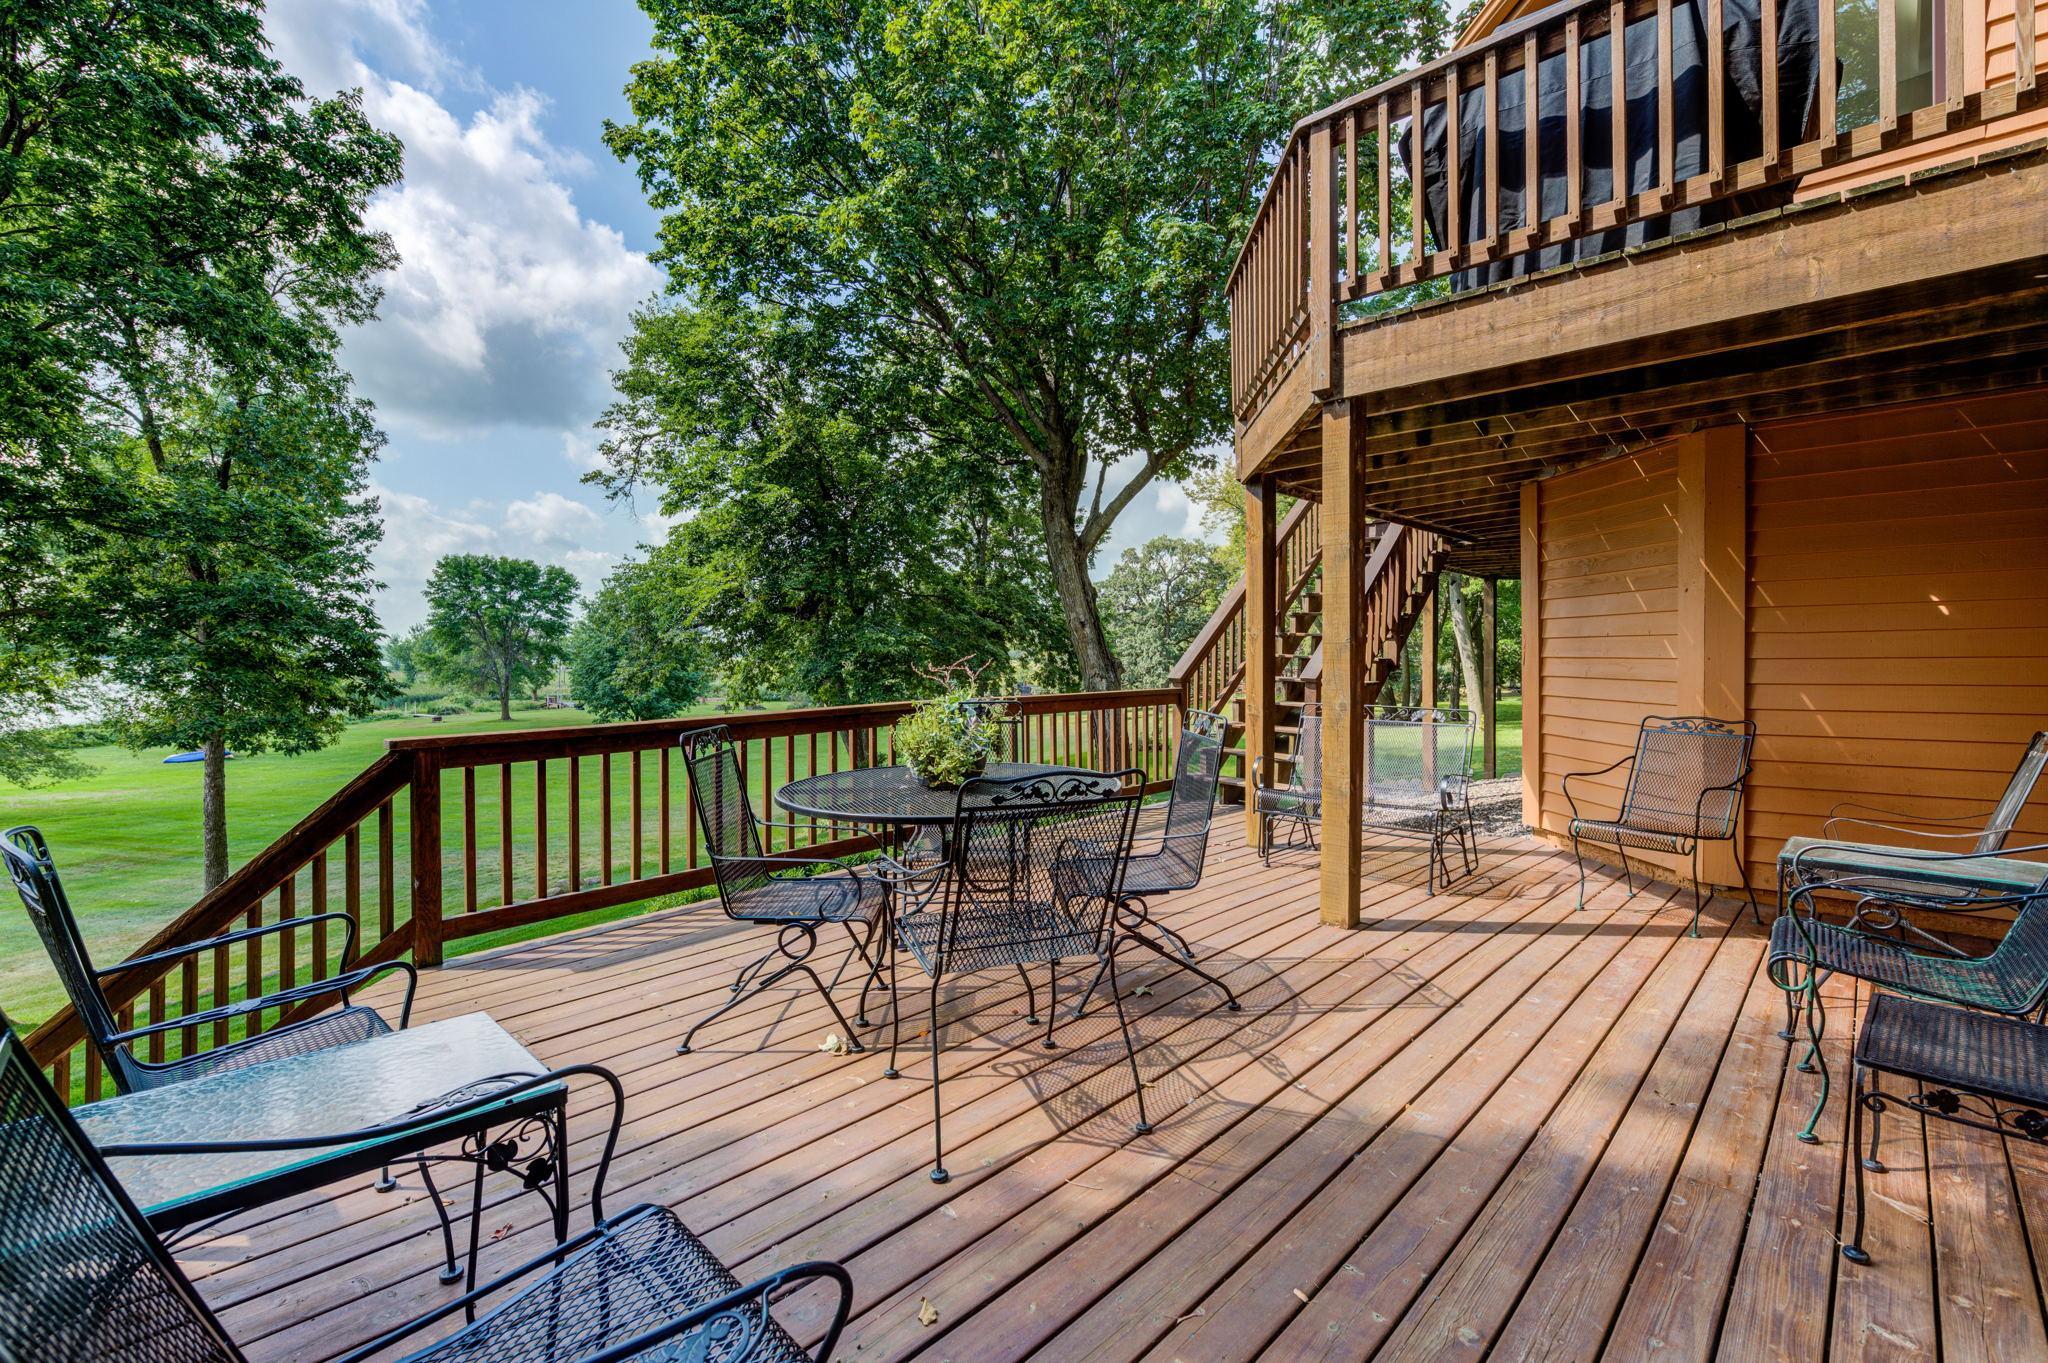 Can you picture yourself relaxing on the multi-level deck as you listen to the loons echo across the shores of French Lake?